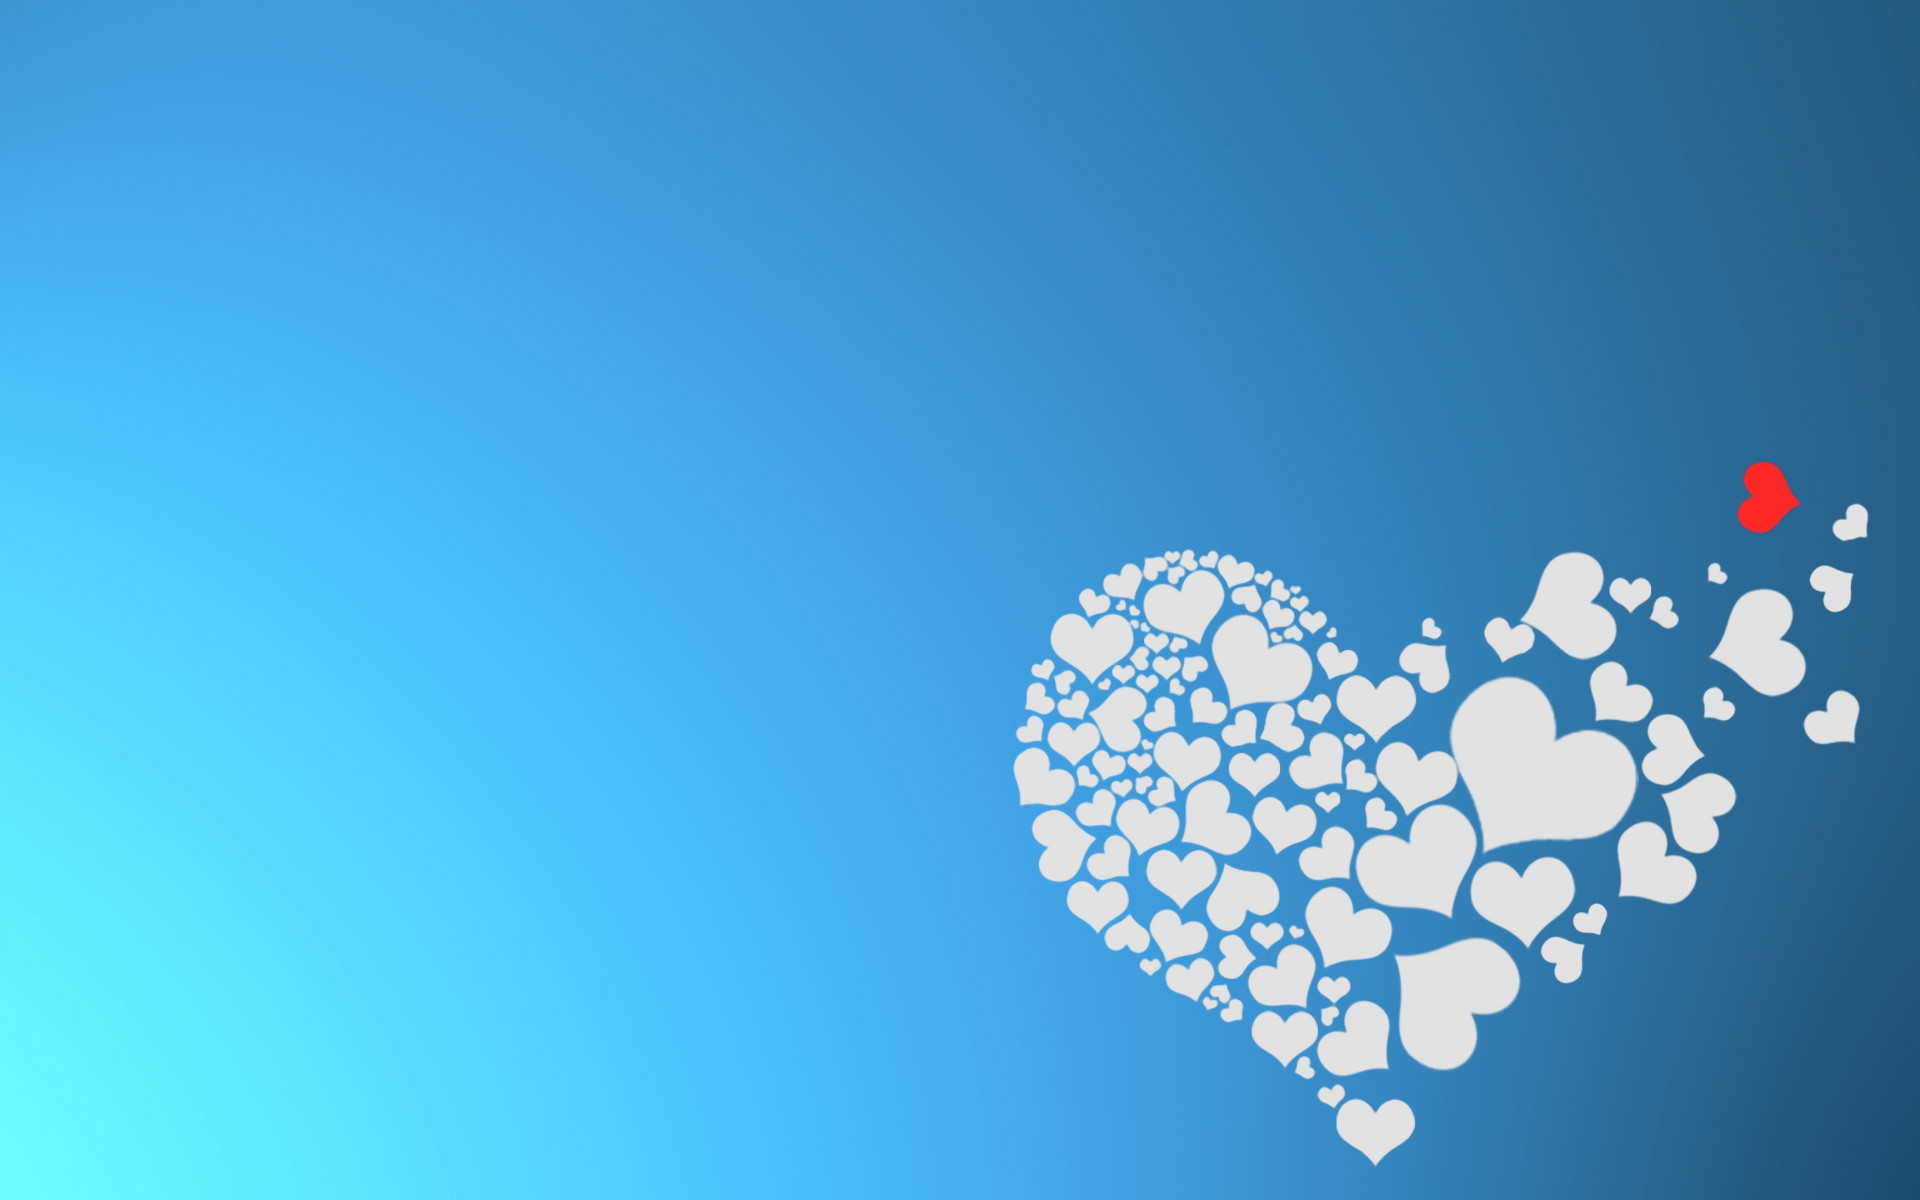 The hearts of love wallpaper 1920x1200